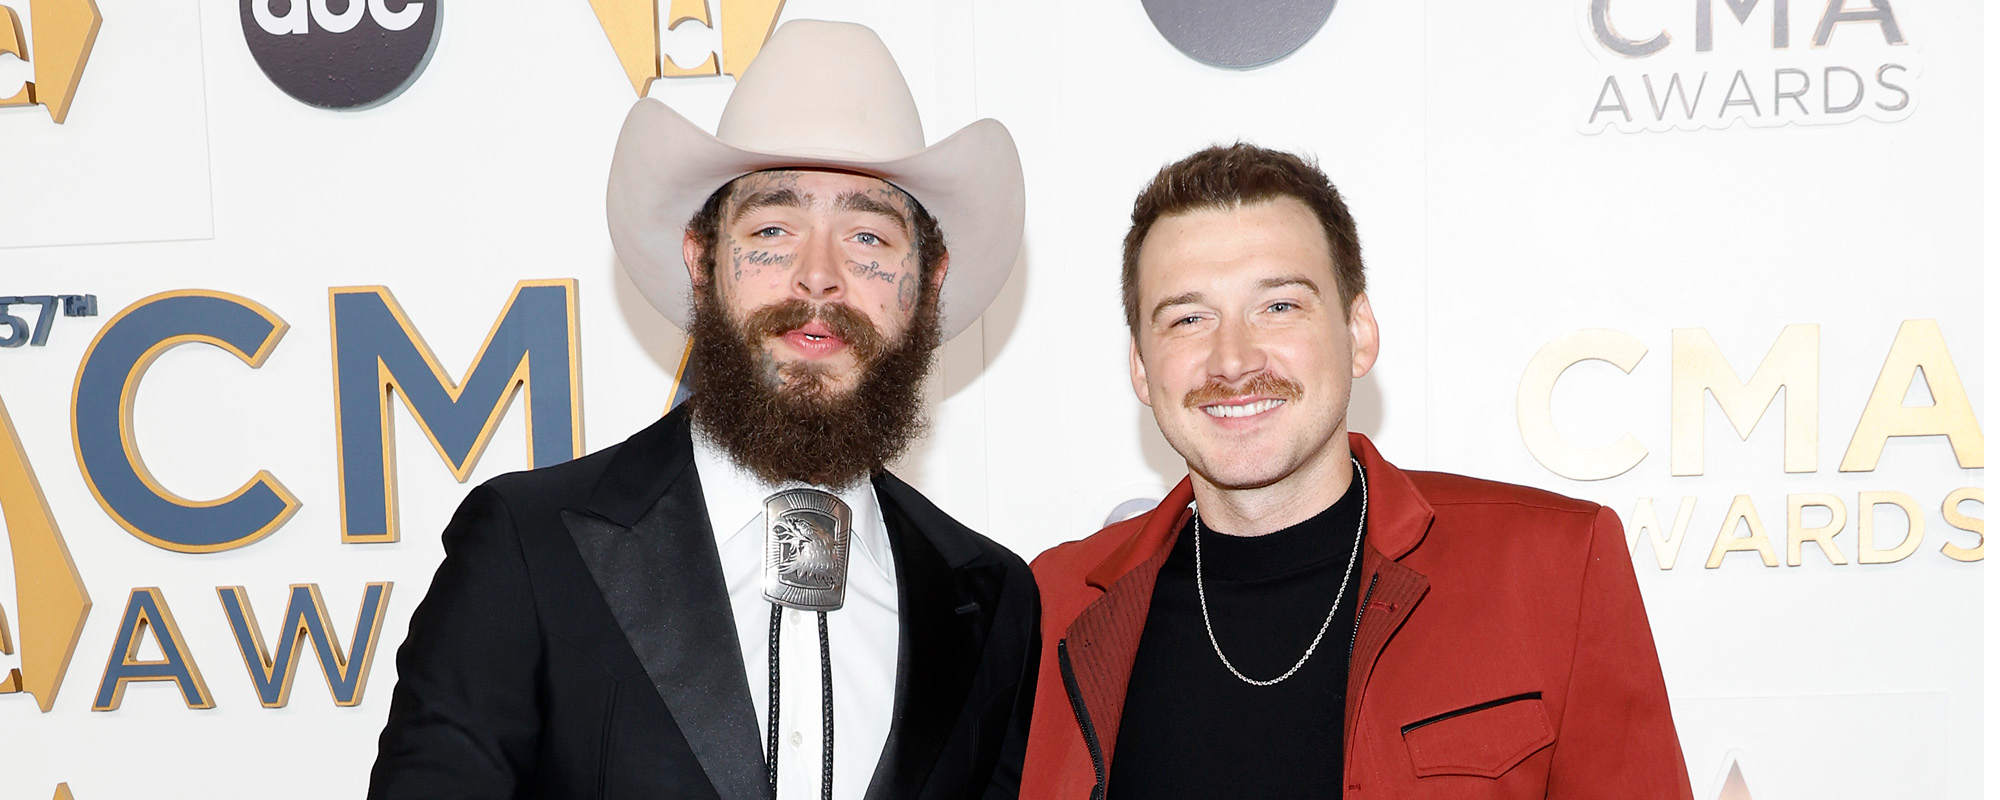 Here Are the Best Fans Reactions to Post Malone and Morgan Wallen’s New Song “I Had Some Help”